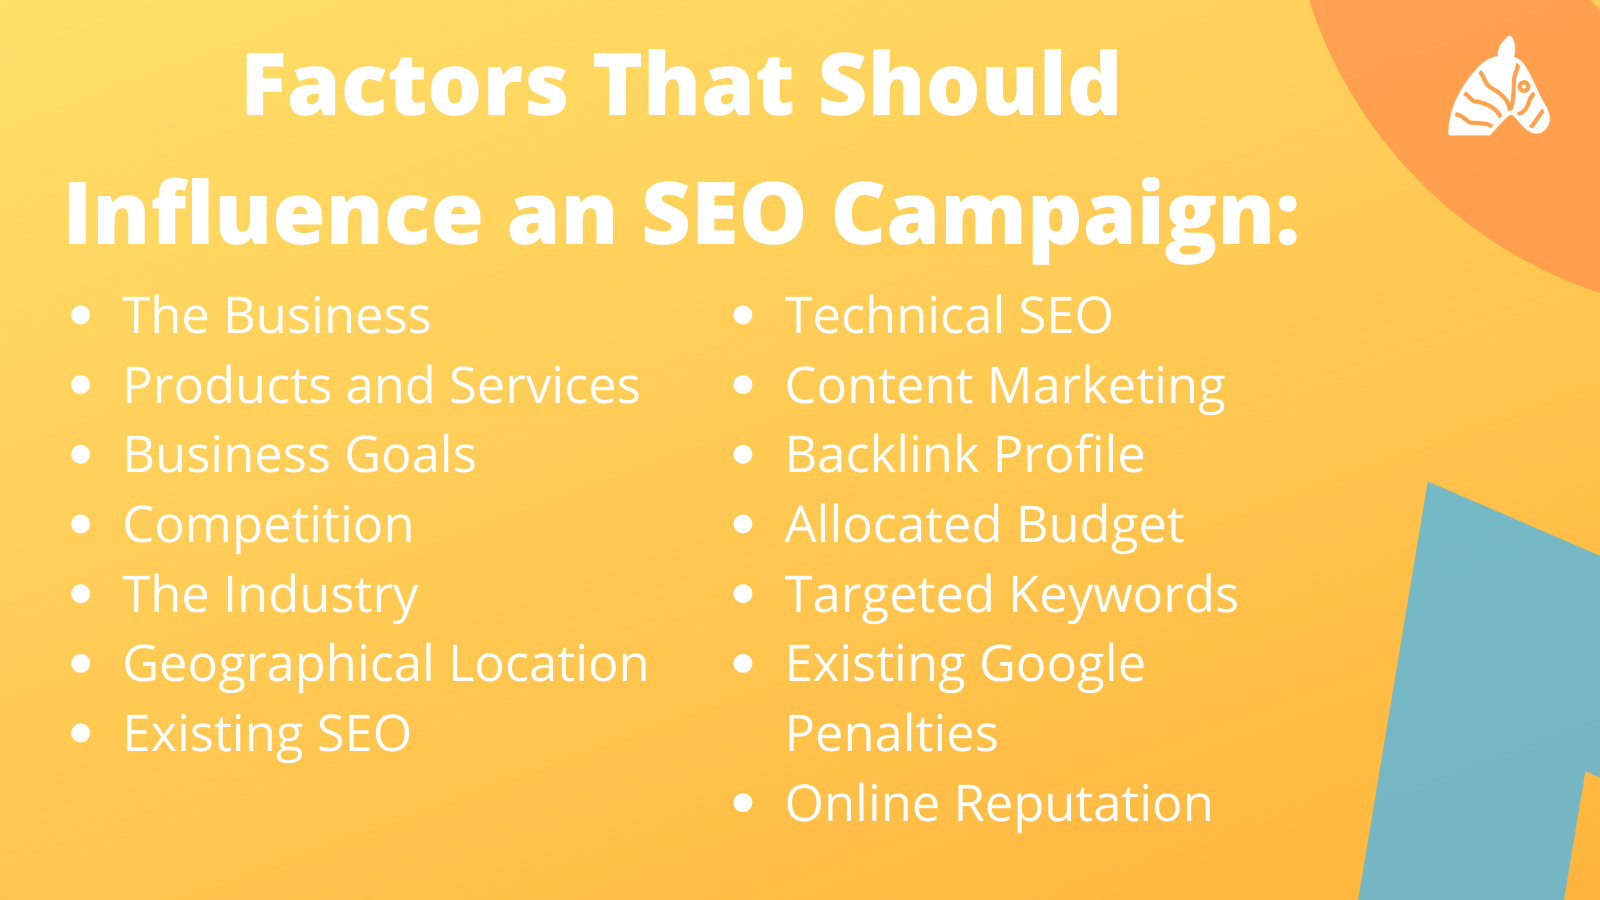 information on what should influence an SEO campaign